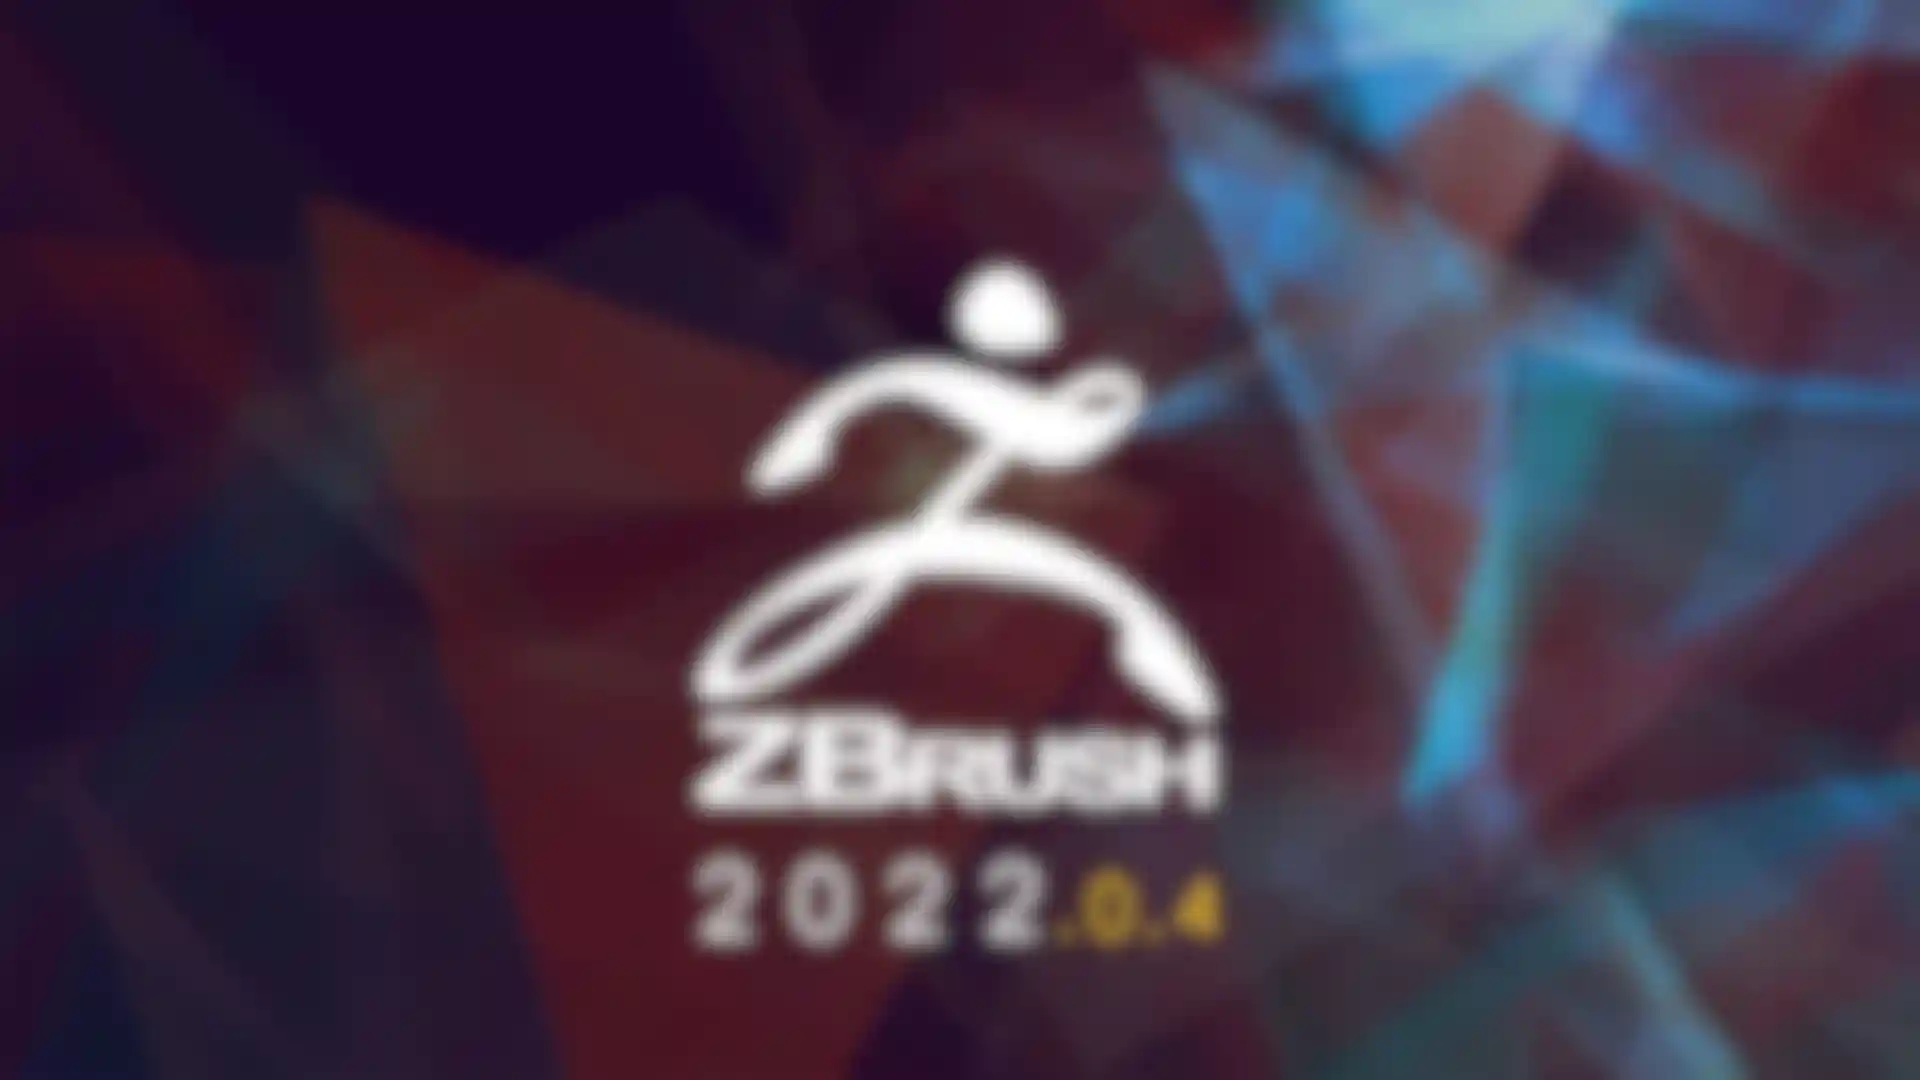 ZBrush 2022.0.4 now available! image